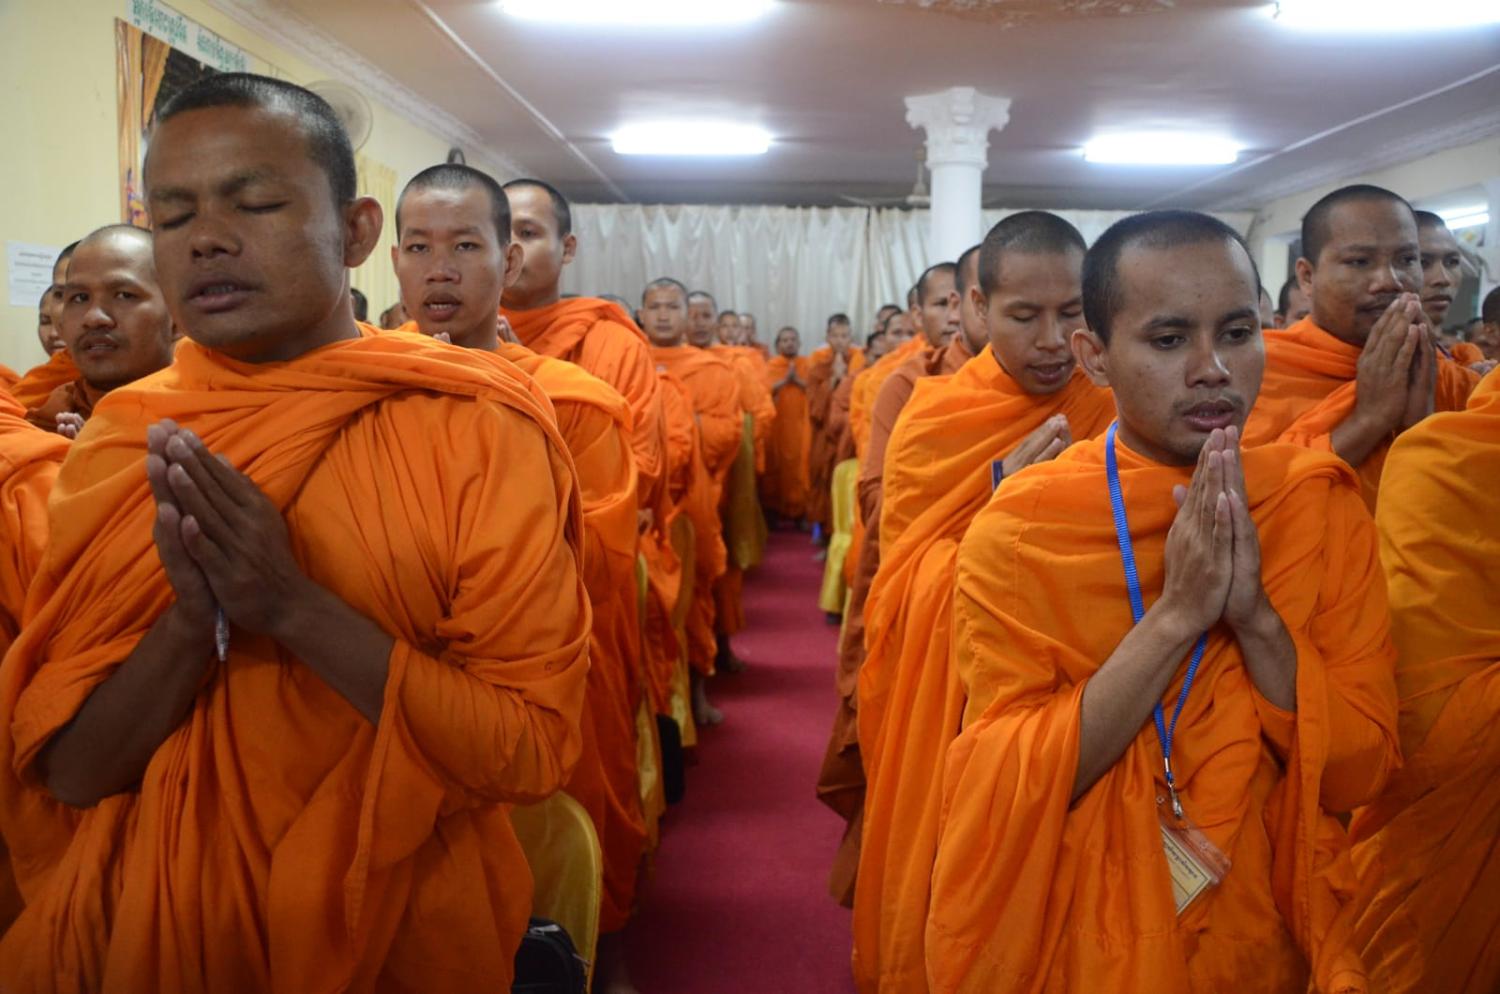 A forum organised by the ECCC with 400 Buddhist monks at Preah Sihanouk Raja Buddhist University in 2011 (ECCC)